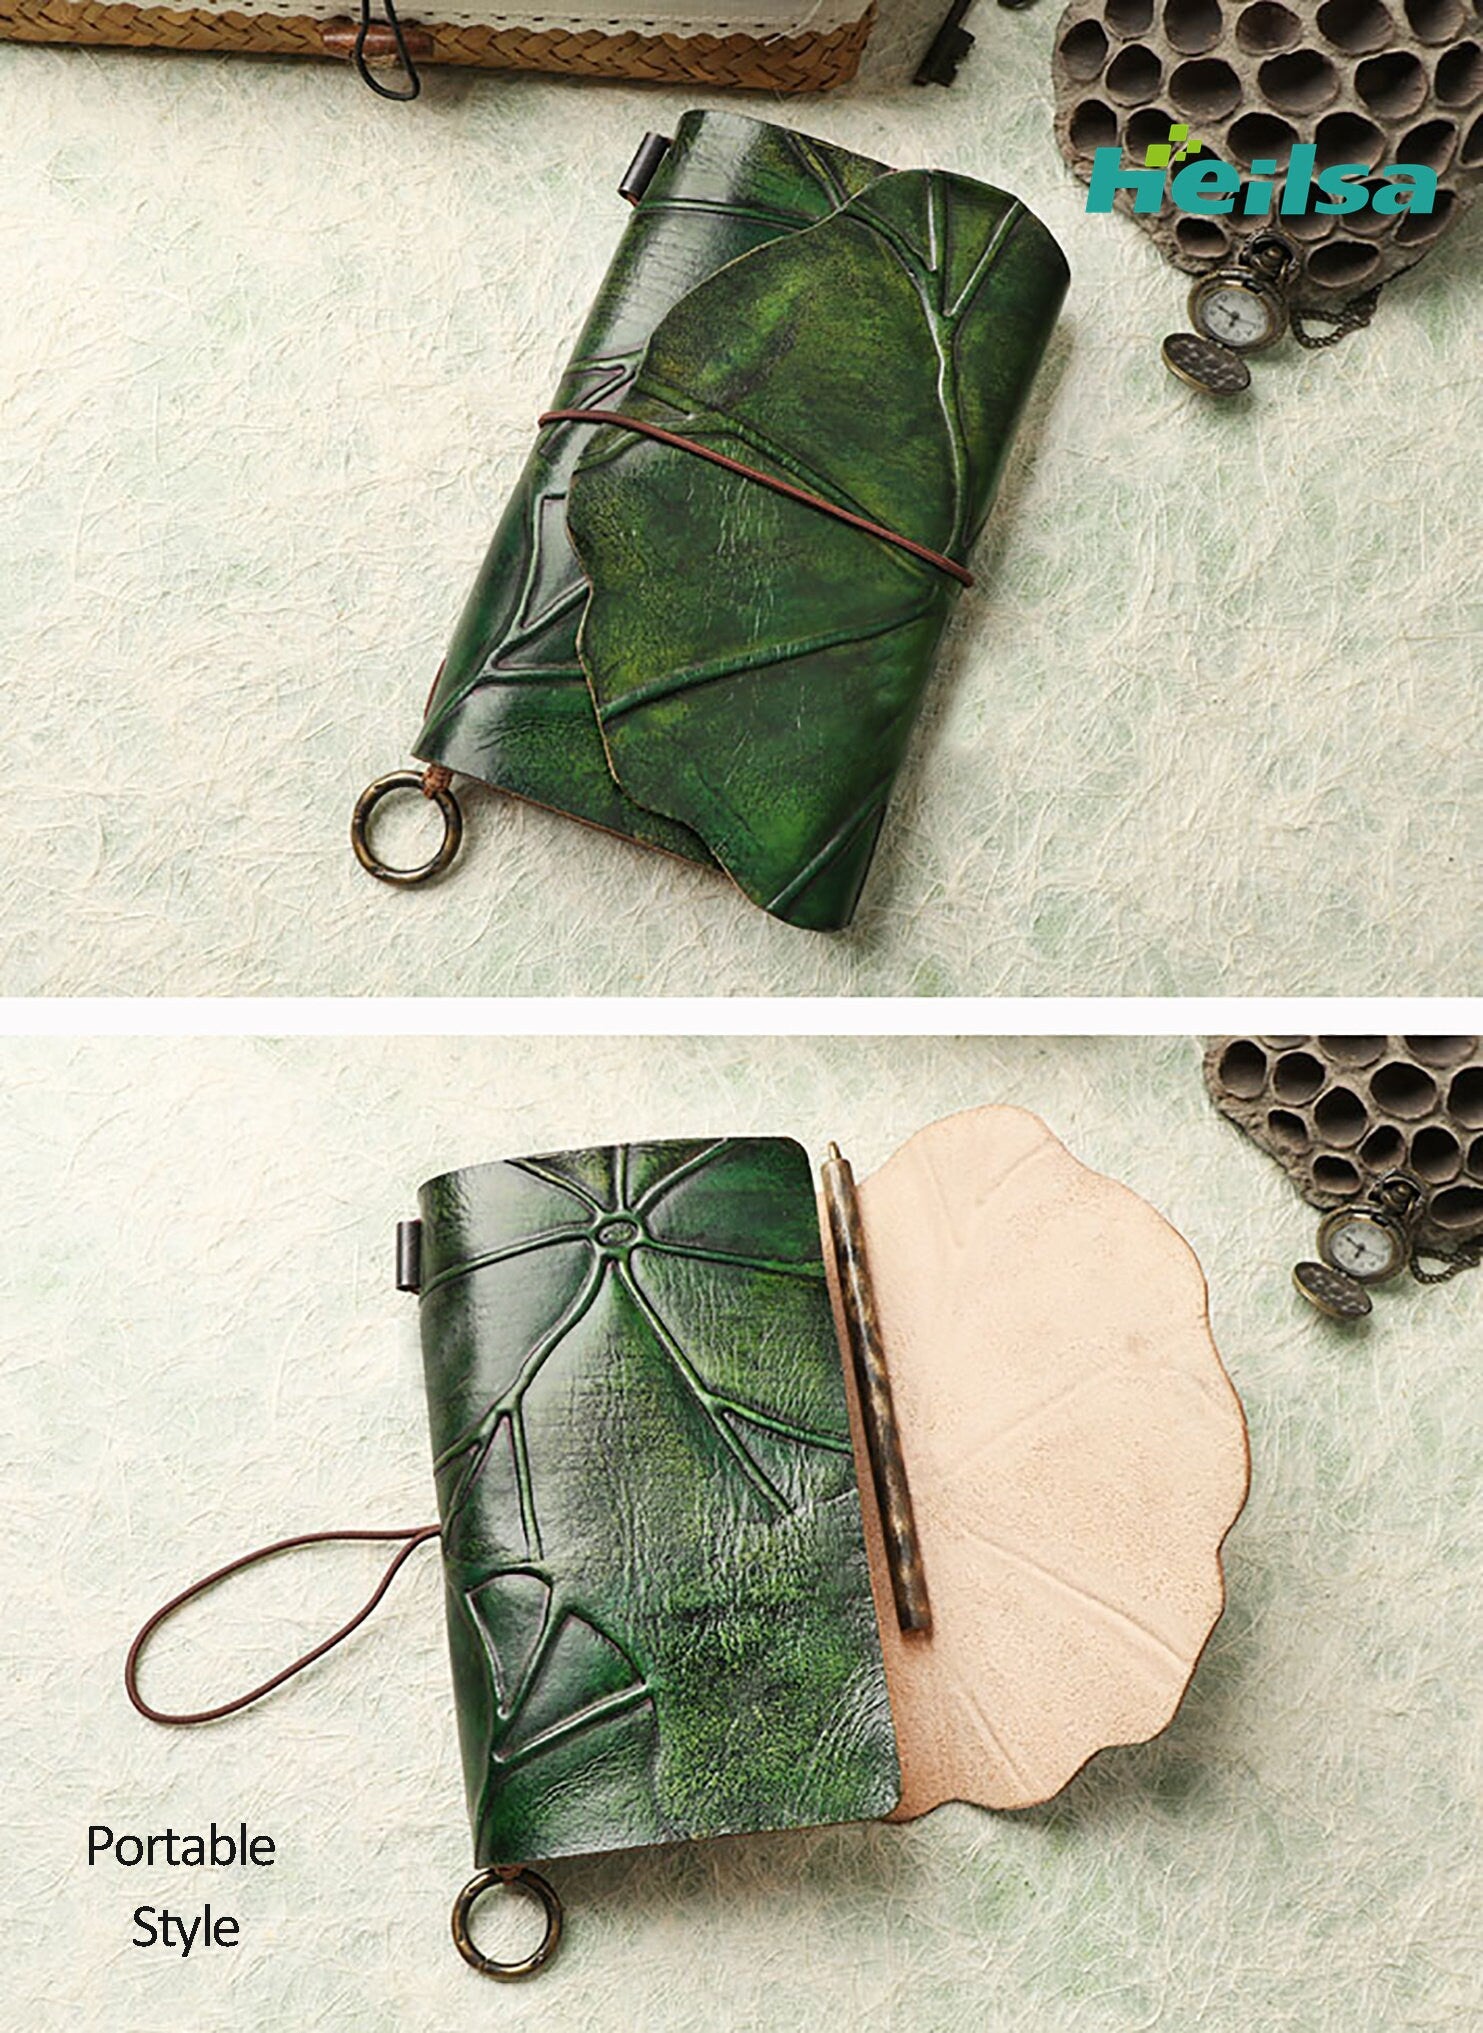 Lotus Leaf Travelers Notebook Handmade. Vintage Leather Cover Junk Journal Notebook Refillable. Sketchbook Diary with Blank Lined Pages 216P